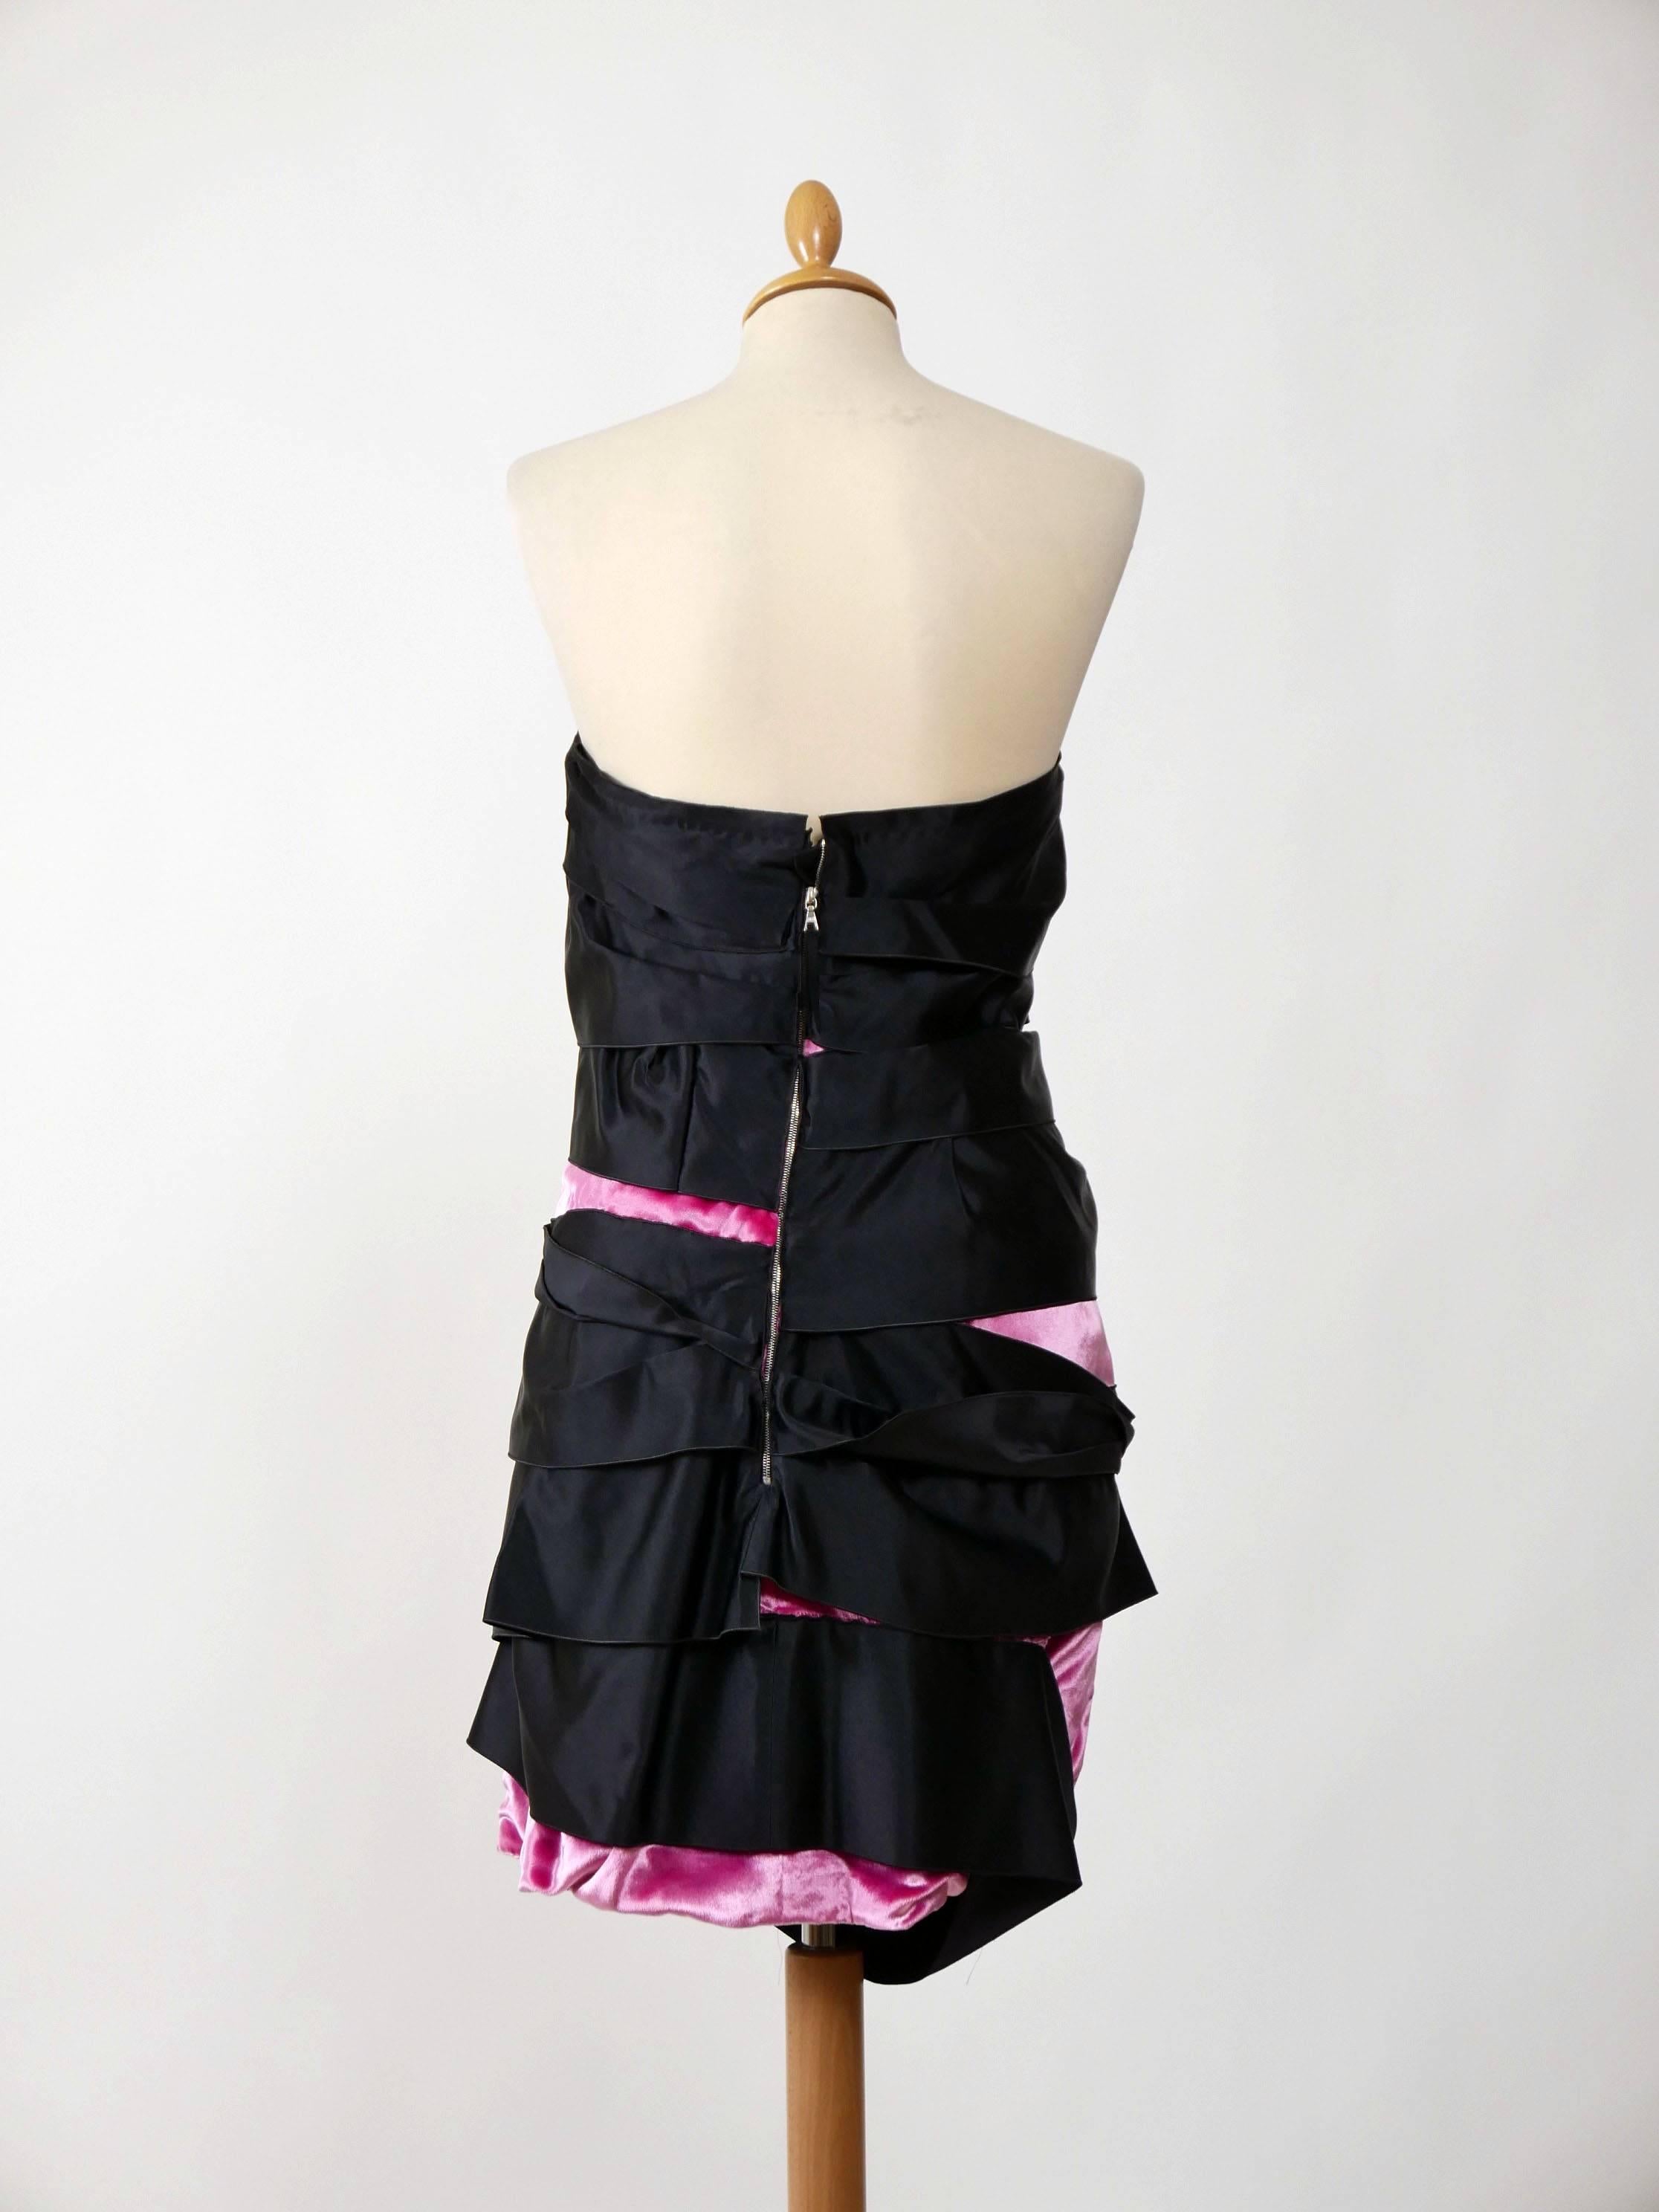 This lovely Marc Jacobs strapless mini dress is in black and pink taffeta fabric. It has back zip closure and silk satin lined.

Very good condition

Label: Marc Jacobs
Fabric: silk
Color :black/pink

Measurement:
Label size 4
Estimeted